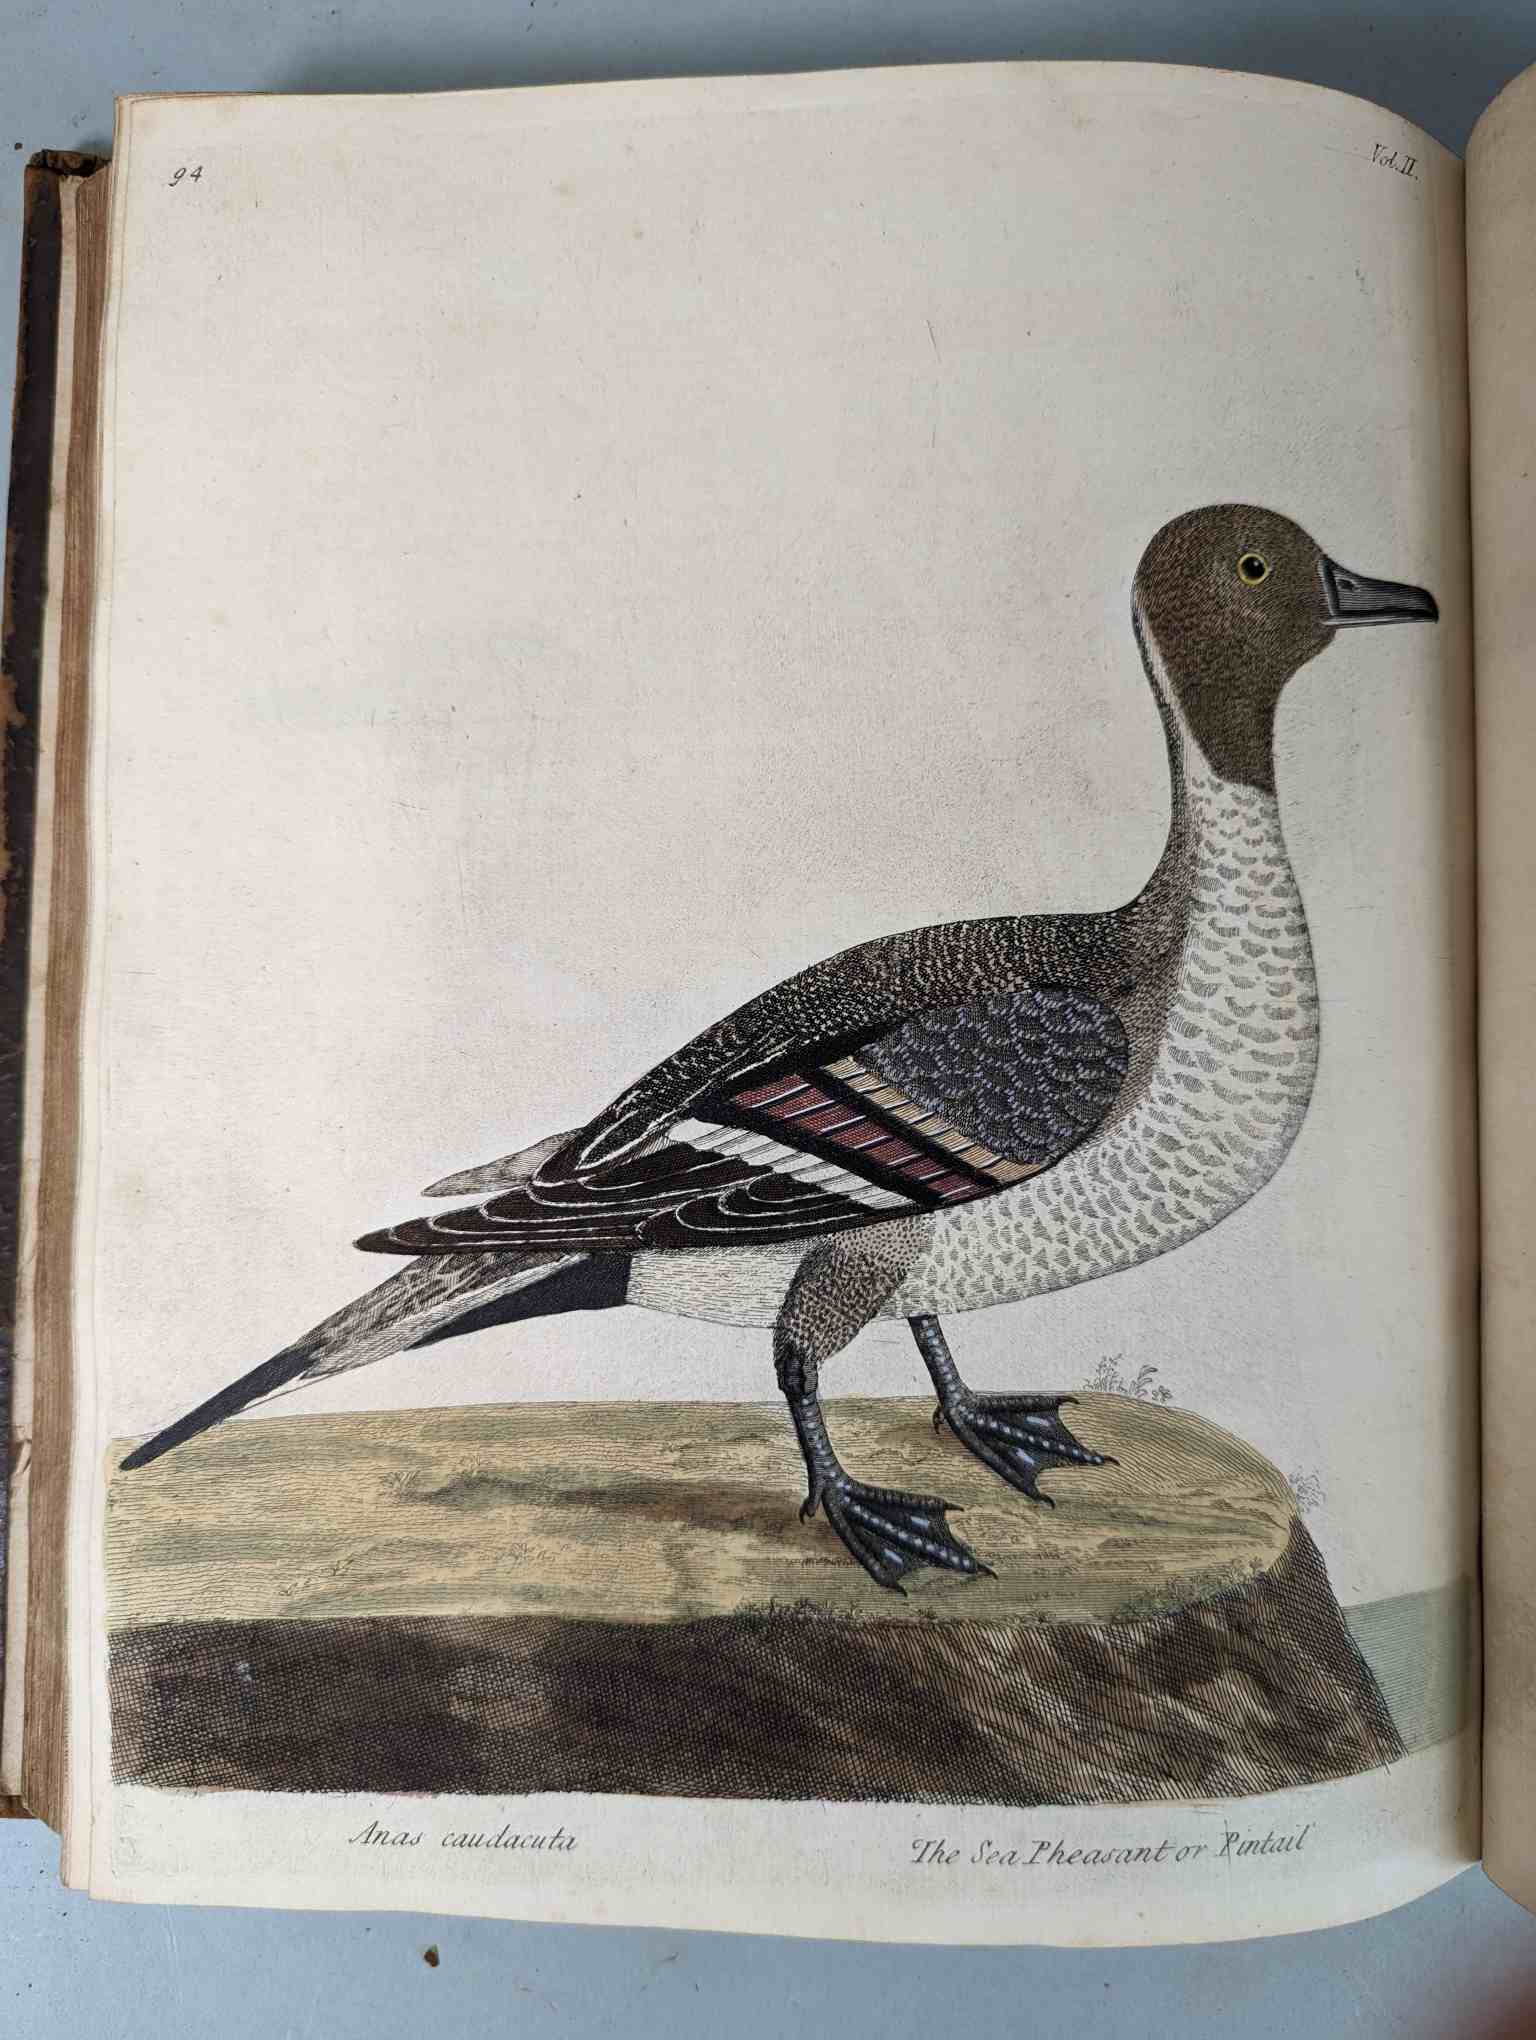 ALBIN, Eleazar. A Natural History of Birds, to which are added, Notes and Observations by W. - Image 199 of 208